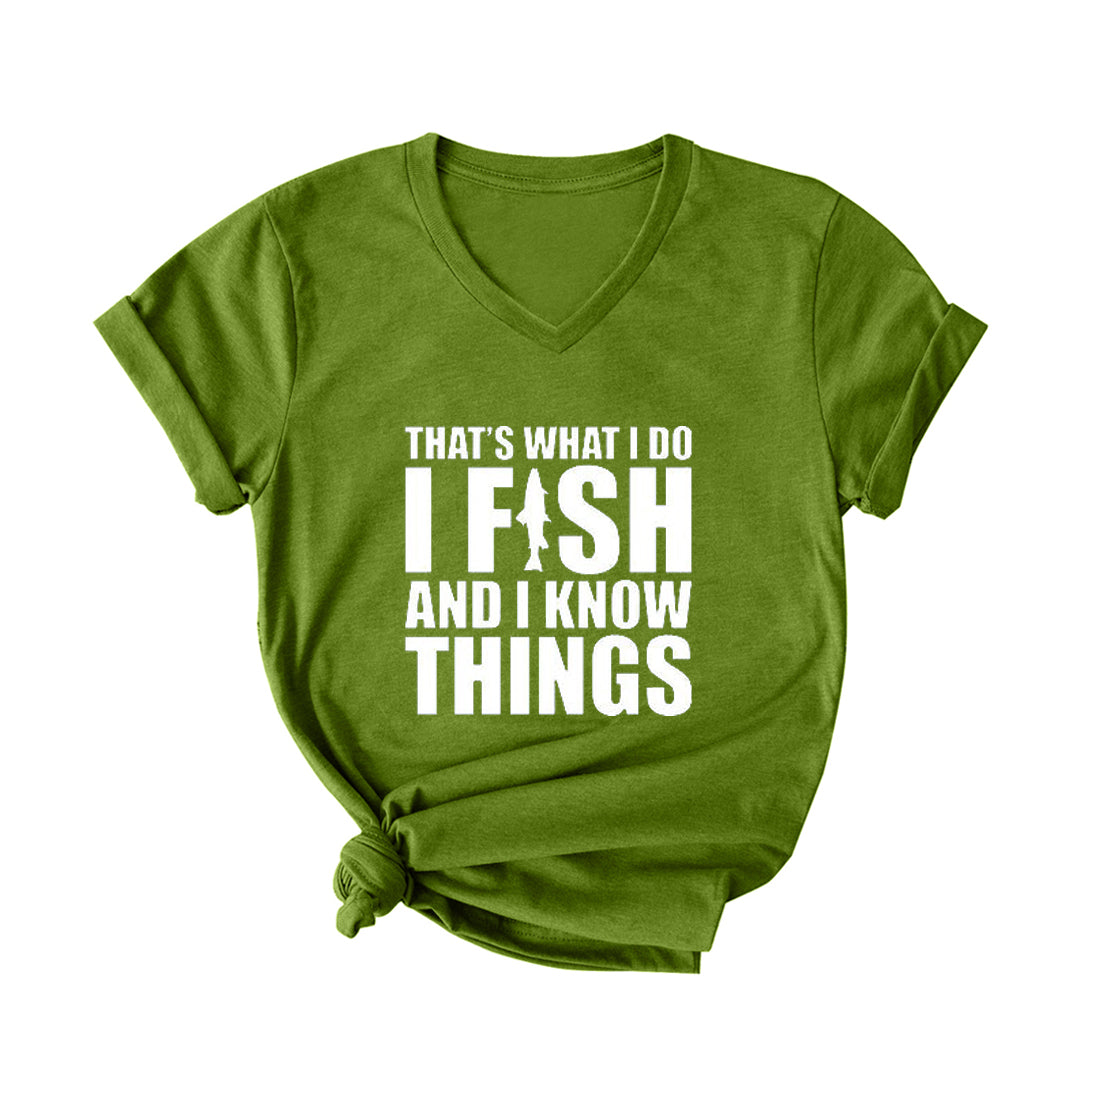 I FISH AND I KNOW THINGS V Neck T-Shirt for Women